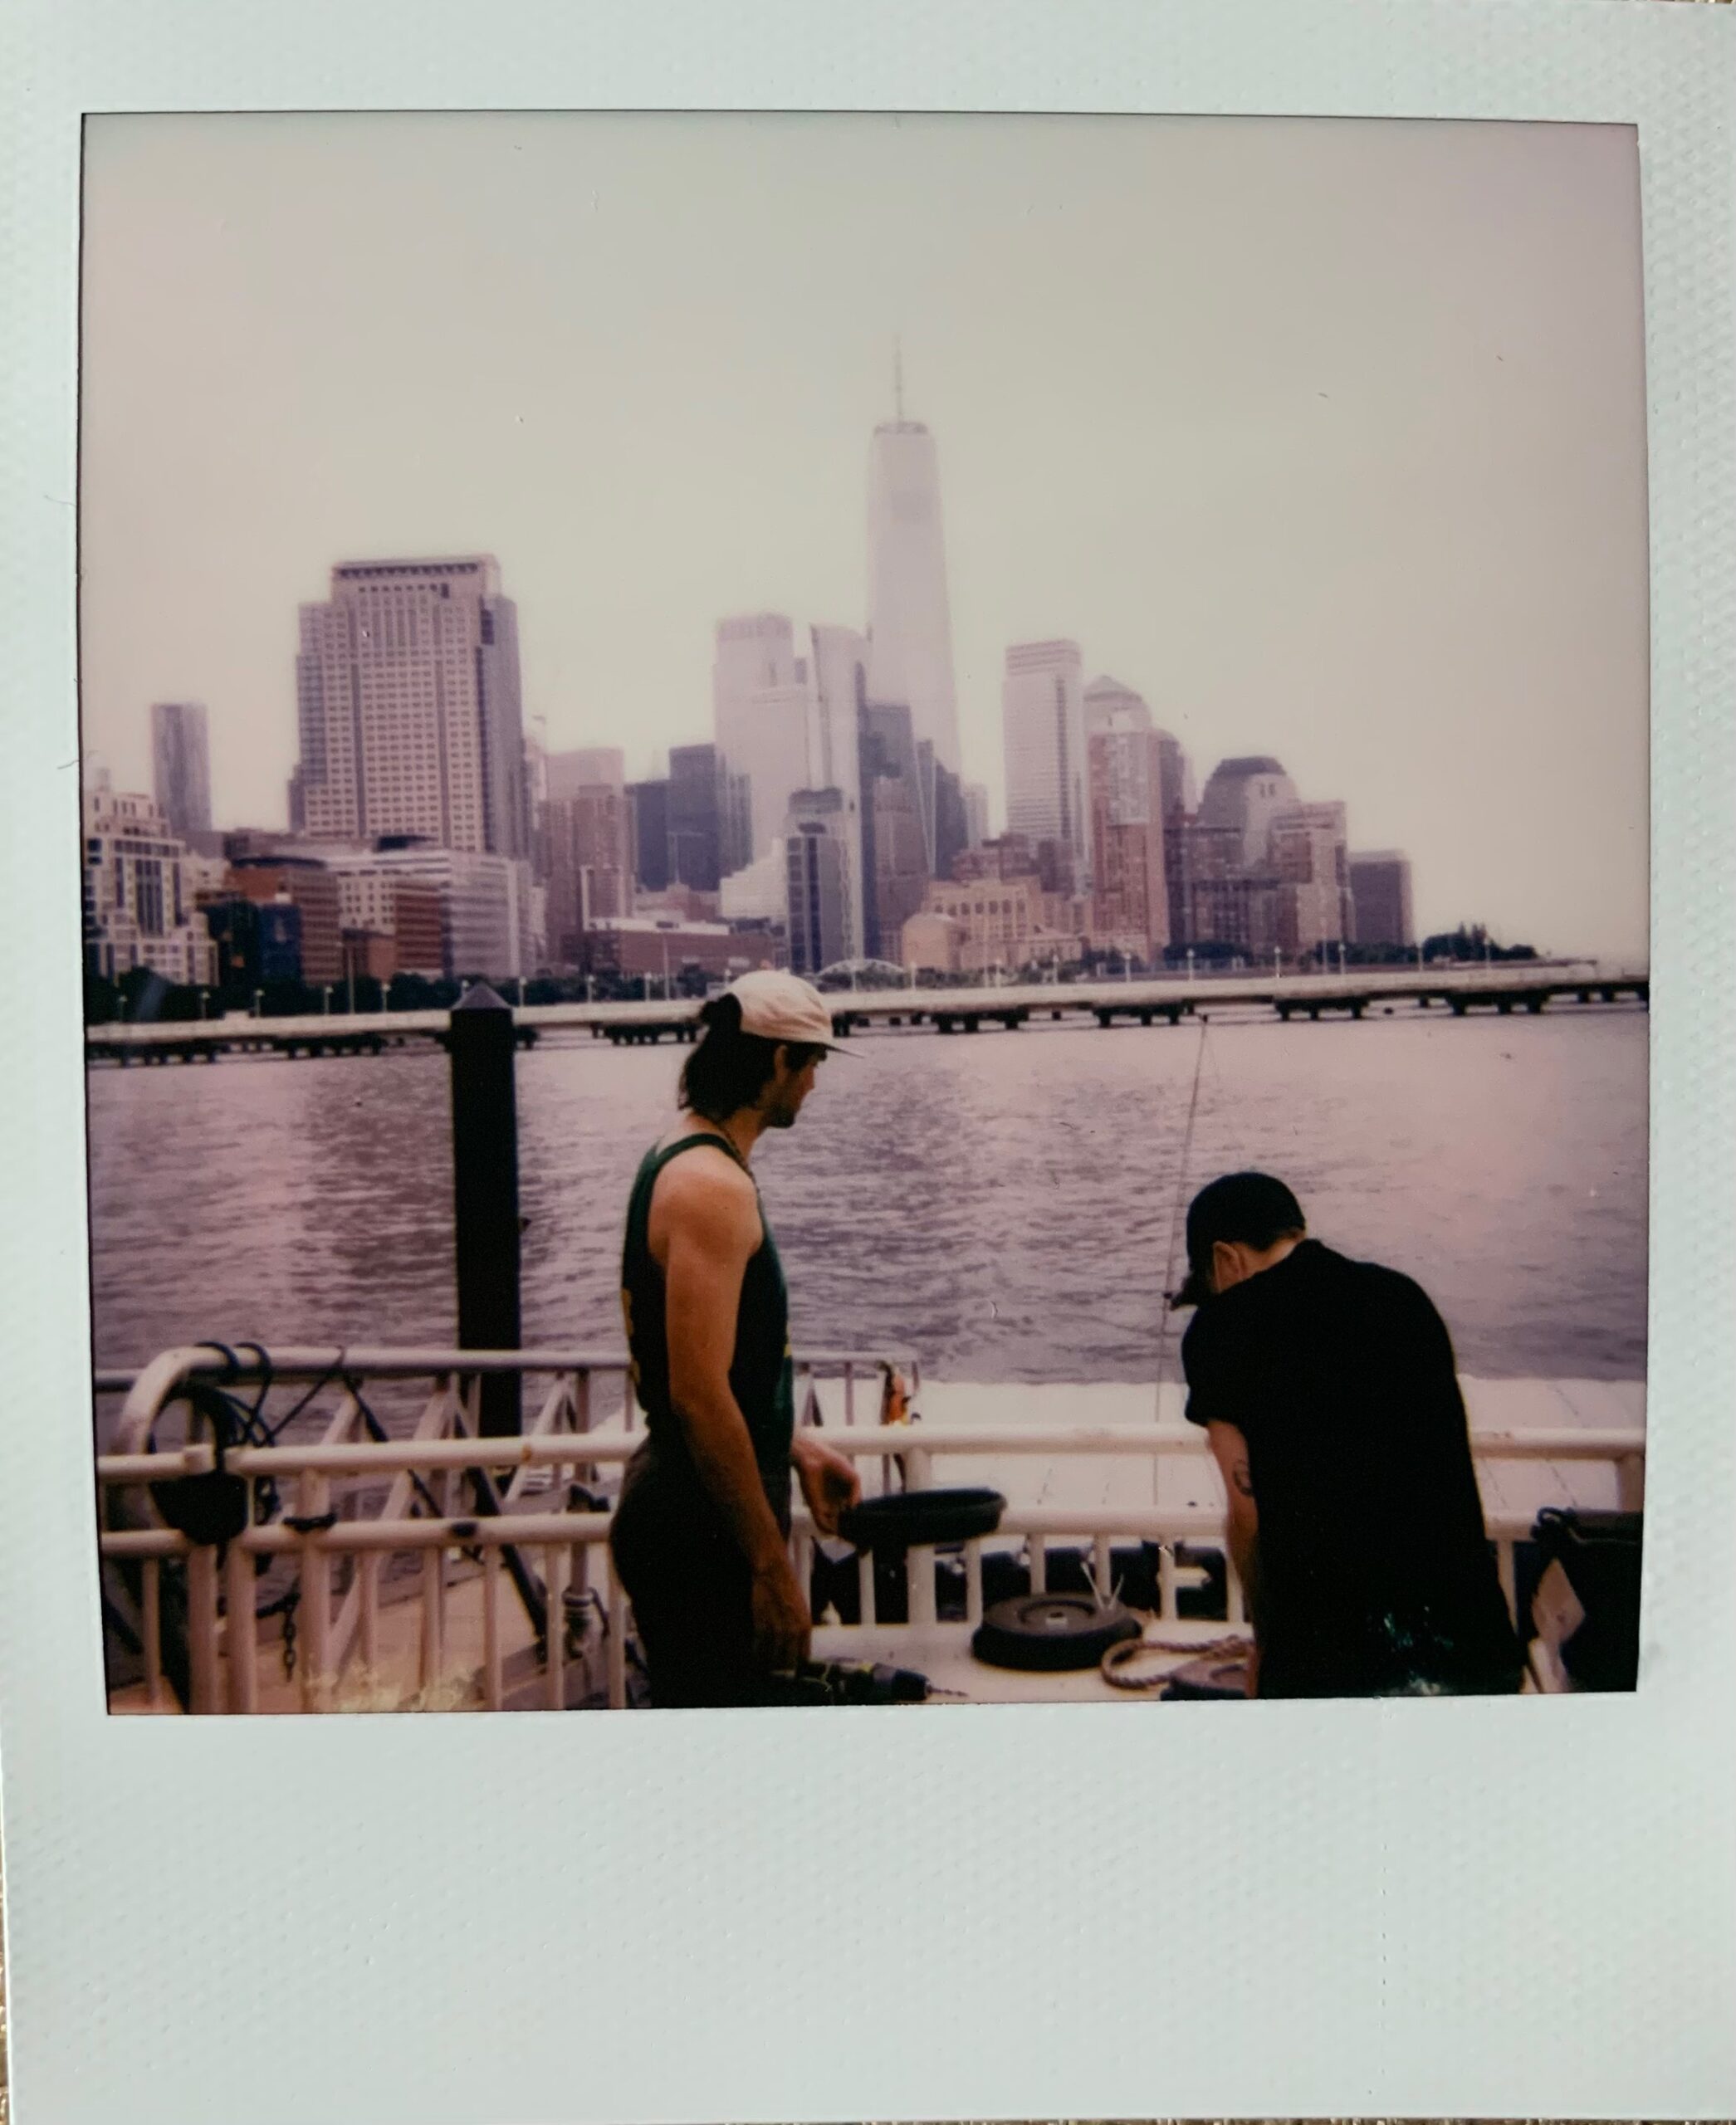 Slater and Jesse work on the mops with their backs turned to the camera. The Hudson River and lower Manhattan are seen in the distance.